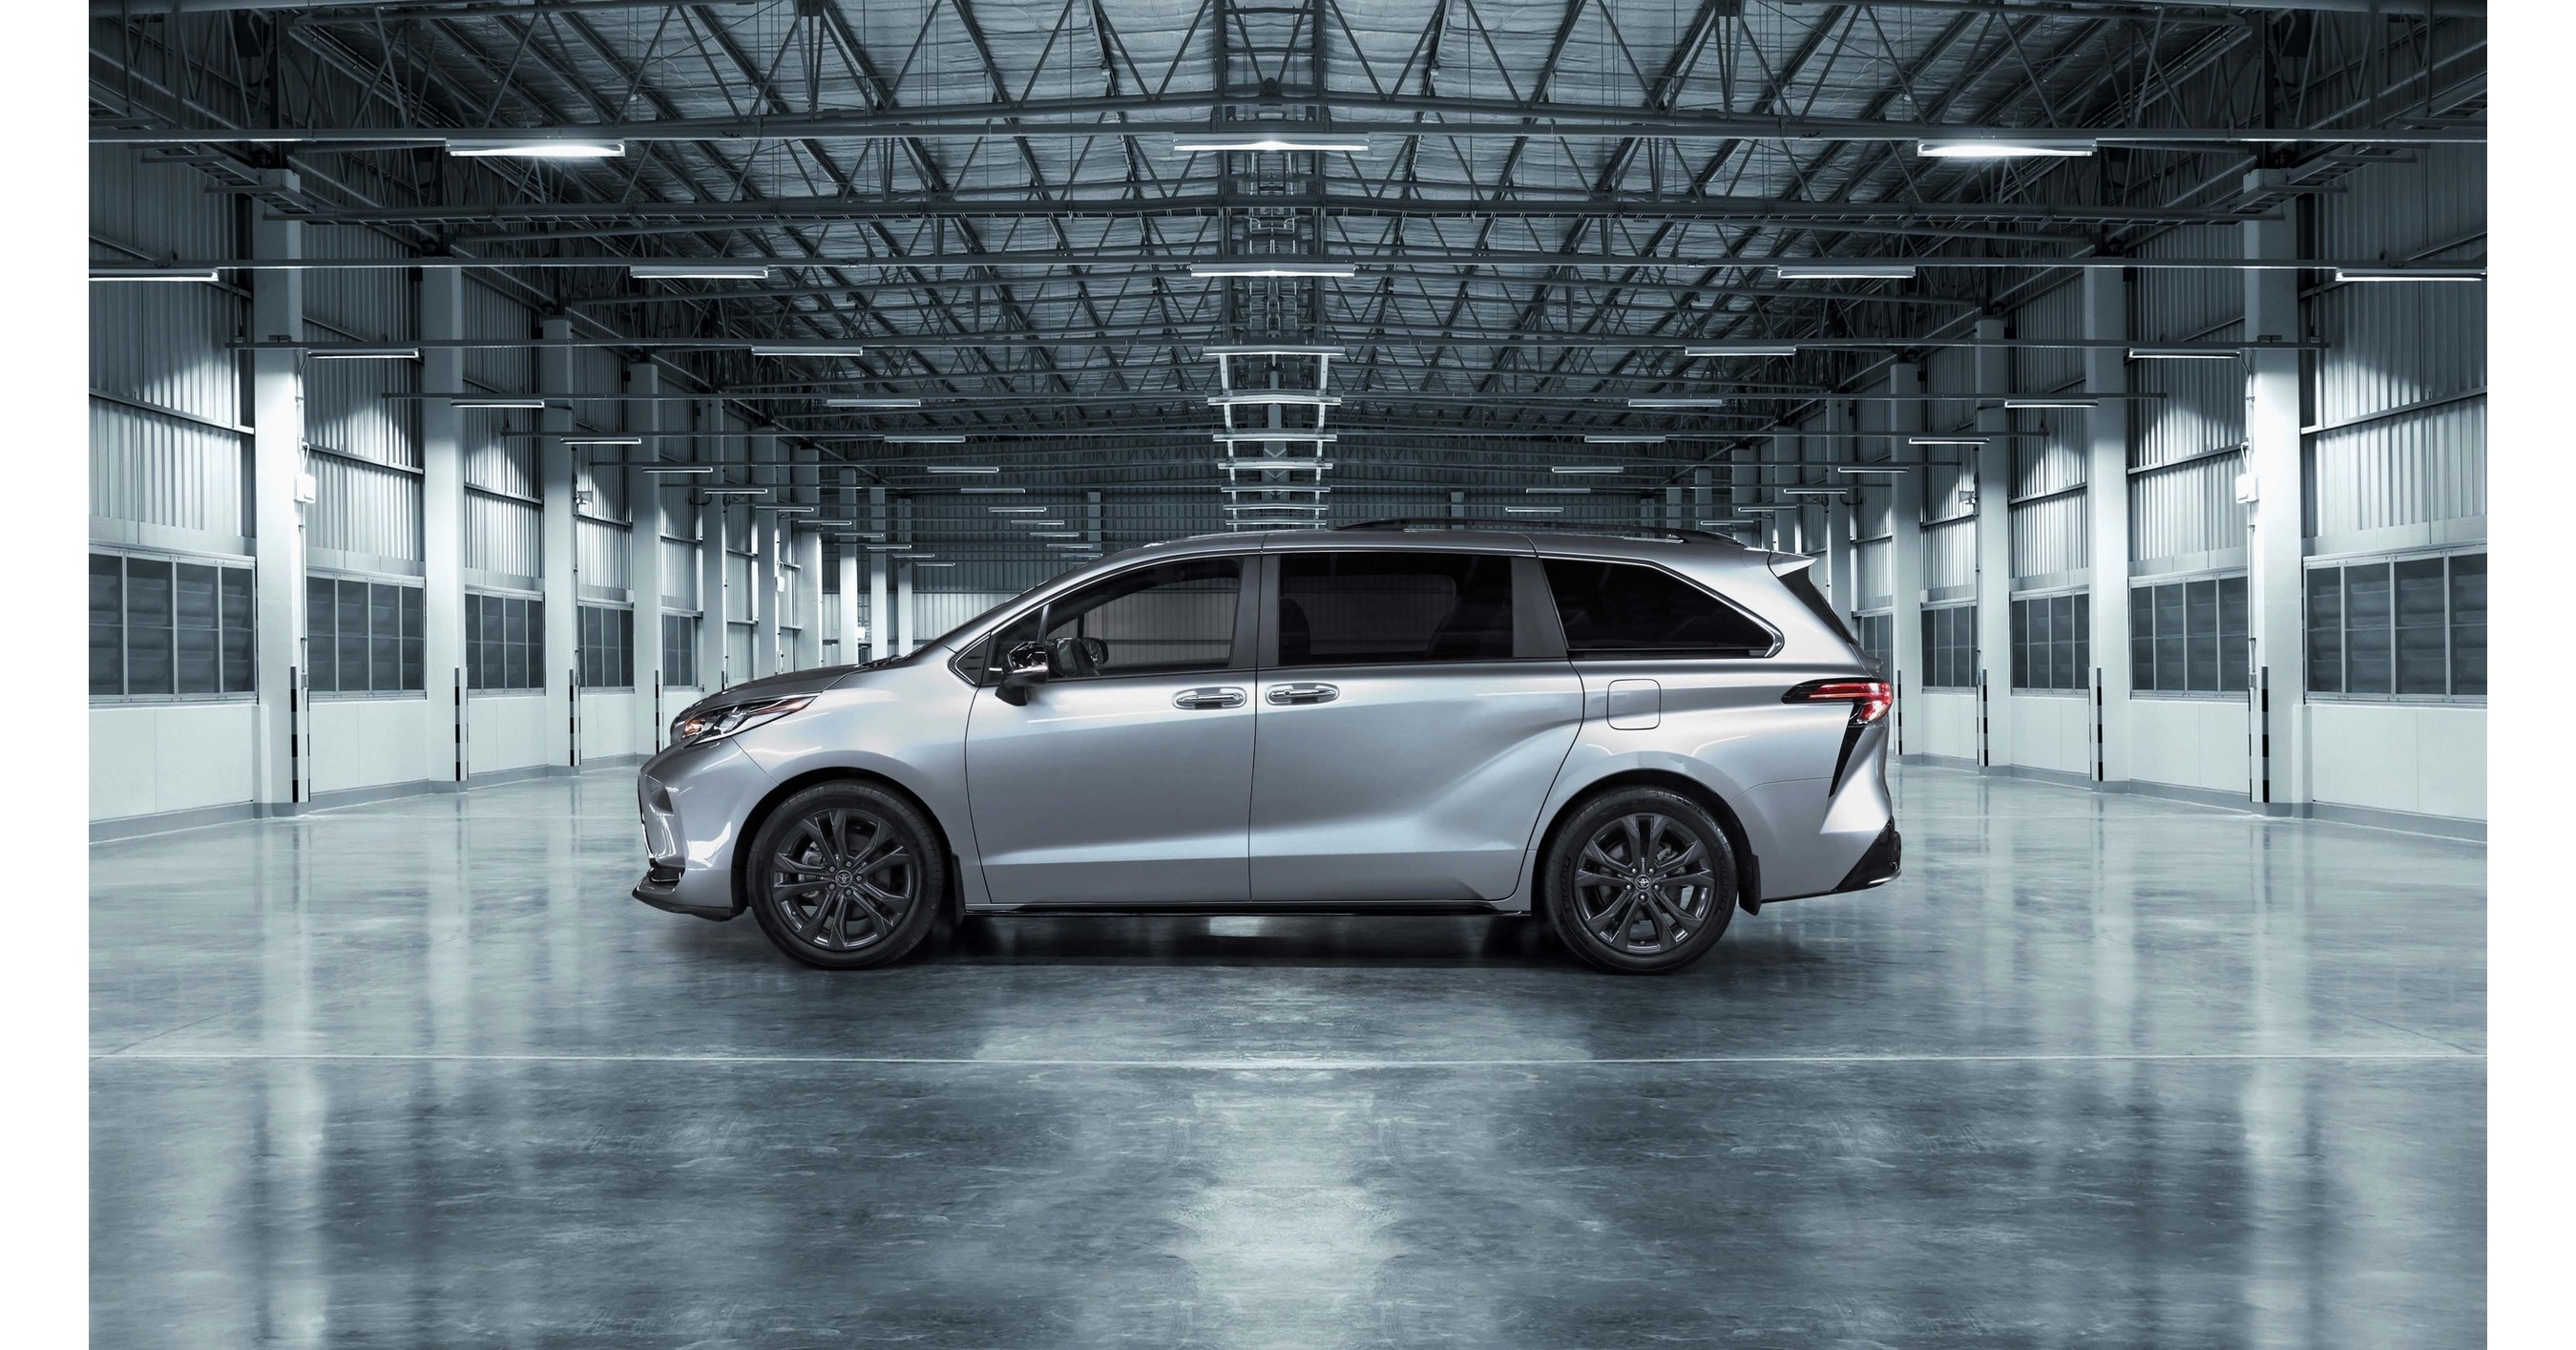 Toyota Marks 25th Anniversary of Sienna with Special Limited Edition